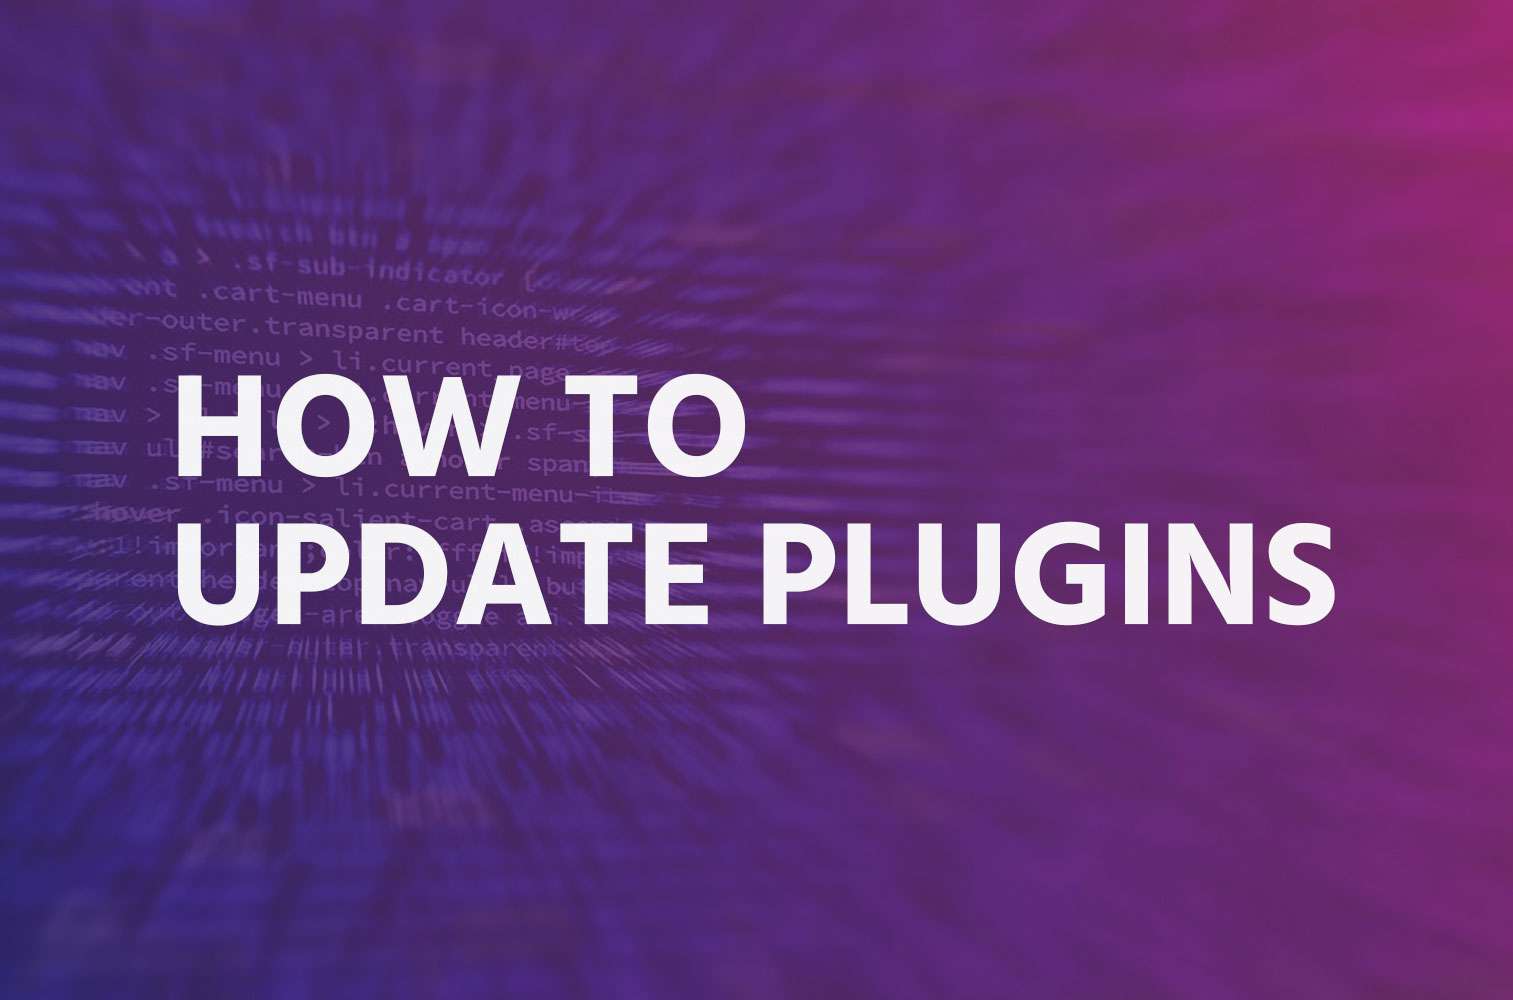 How to update plugins